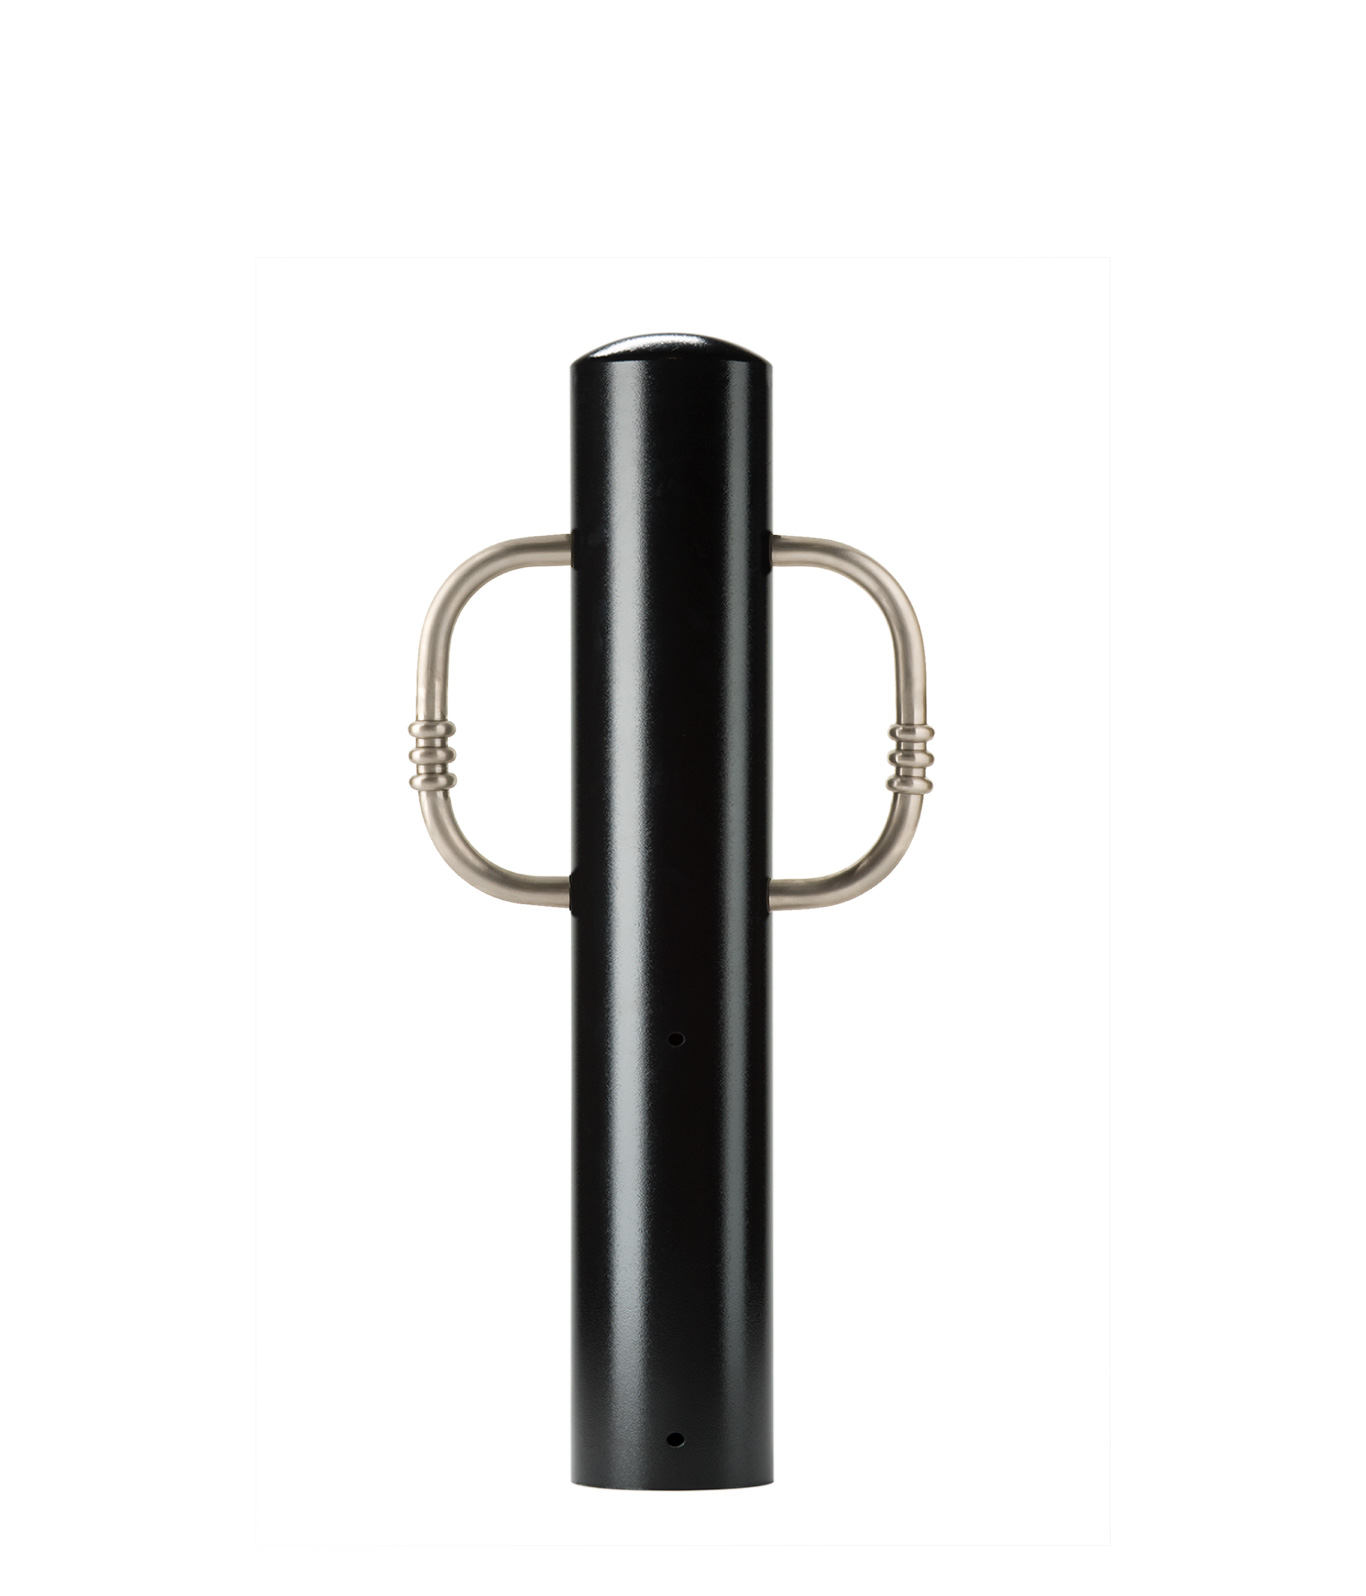 R-7914-RSA bollard with stainless steel bike parking arms